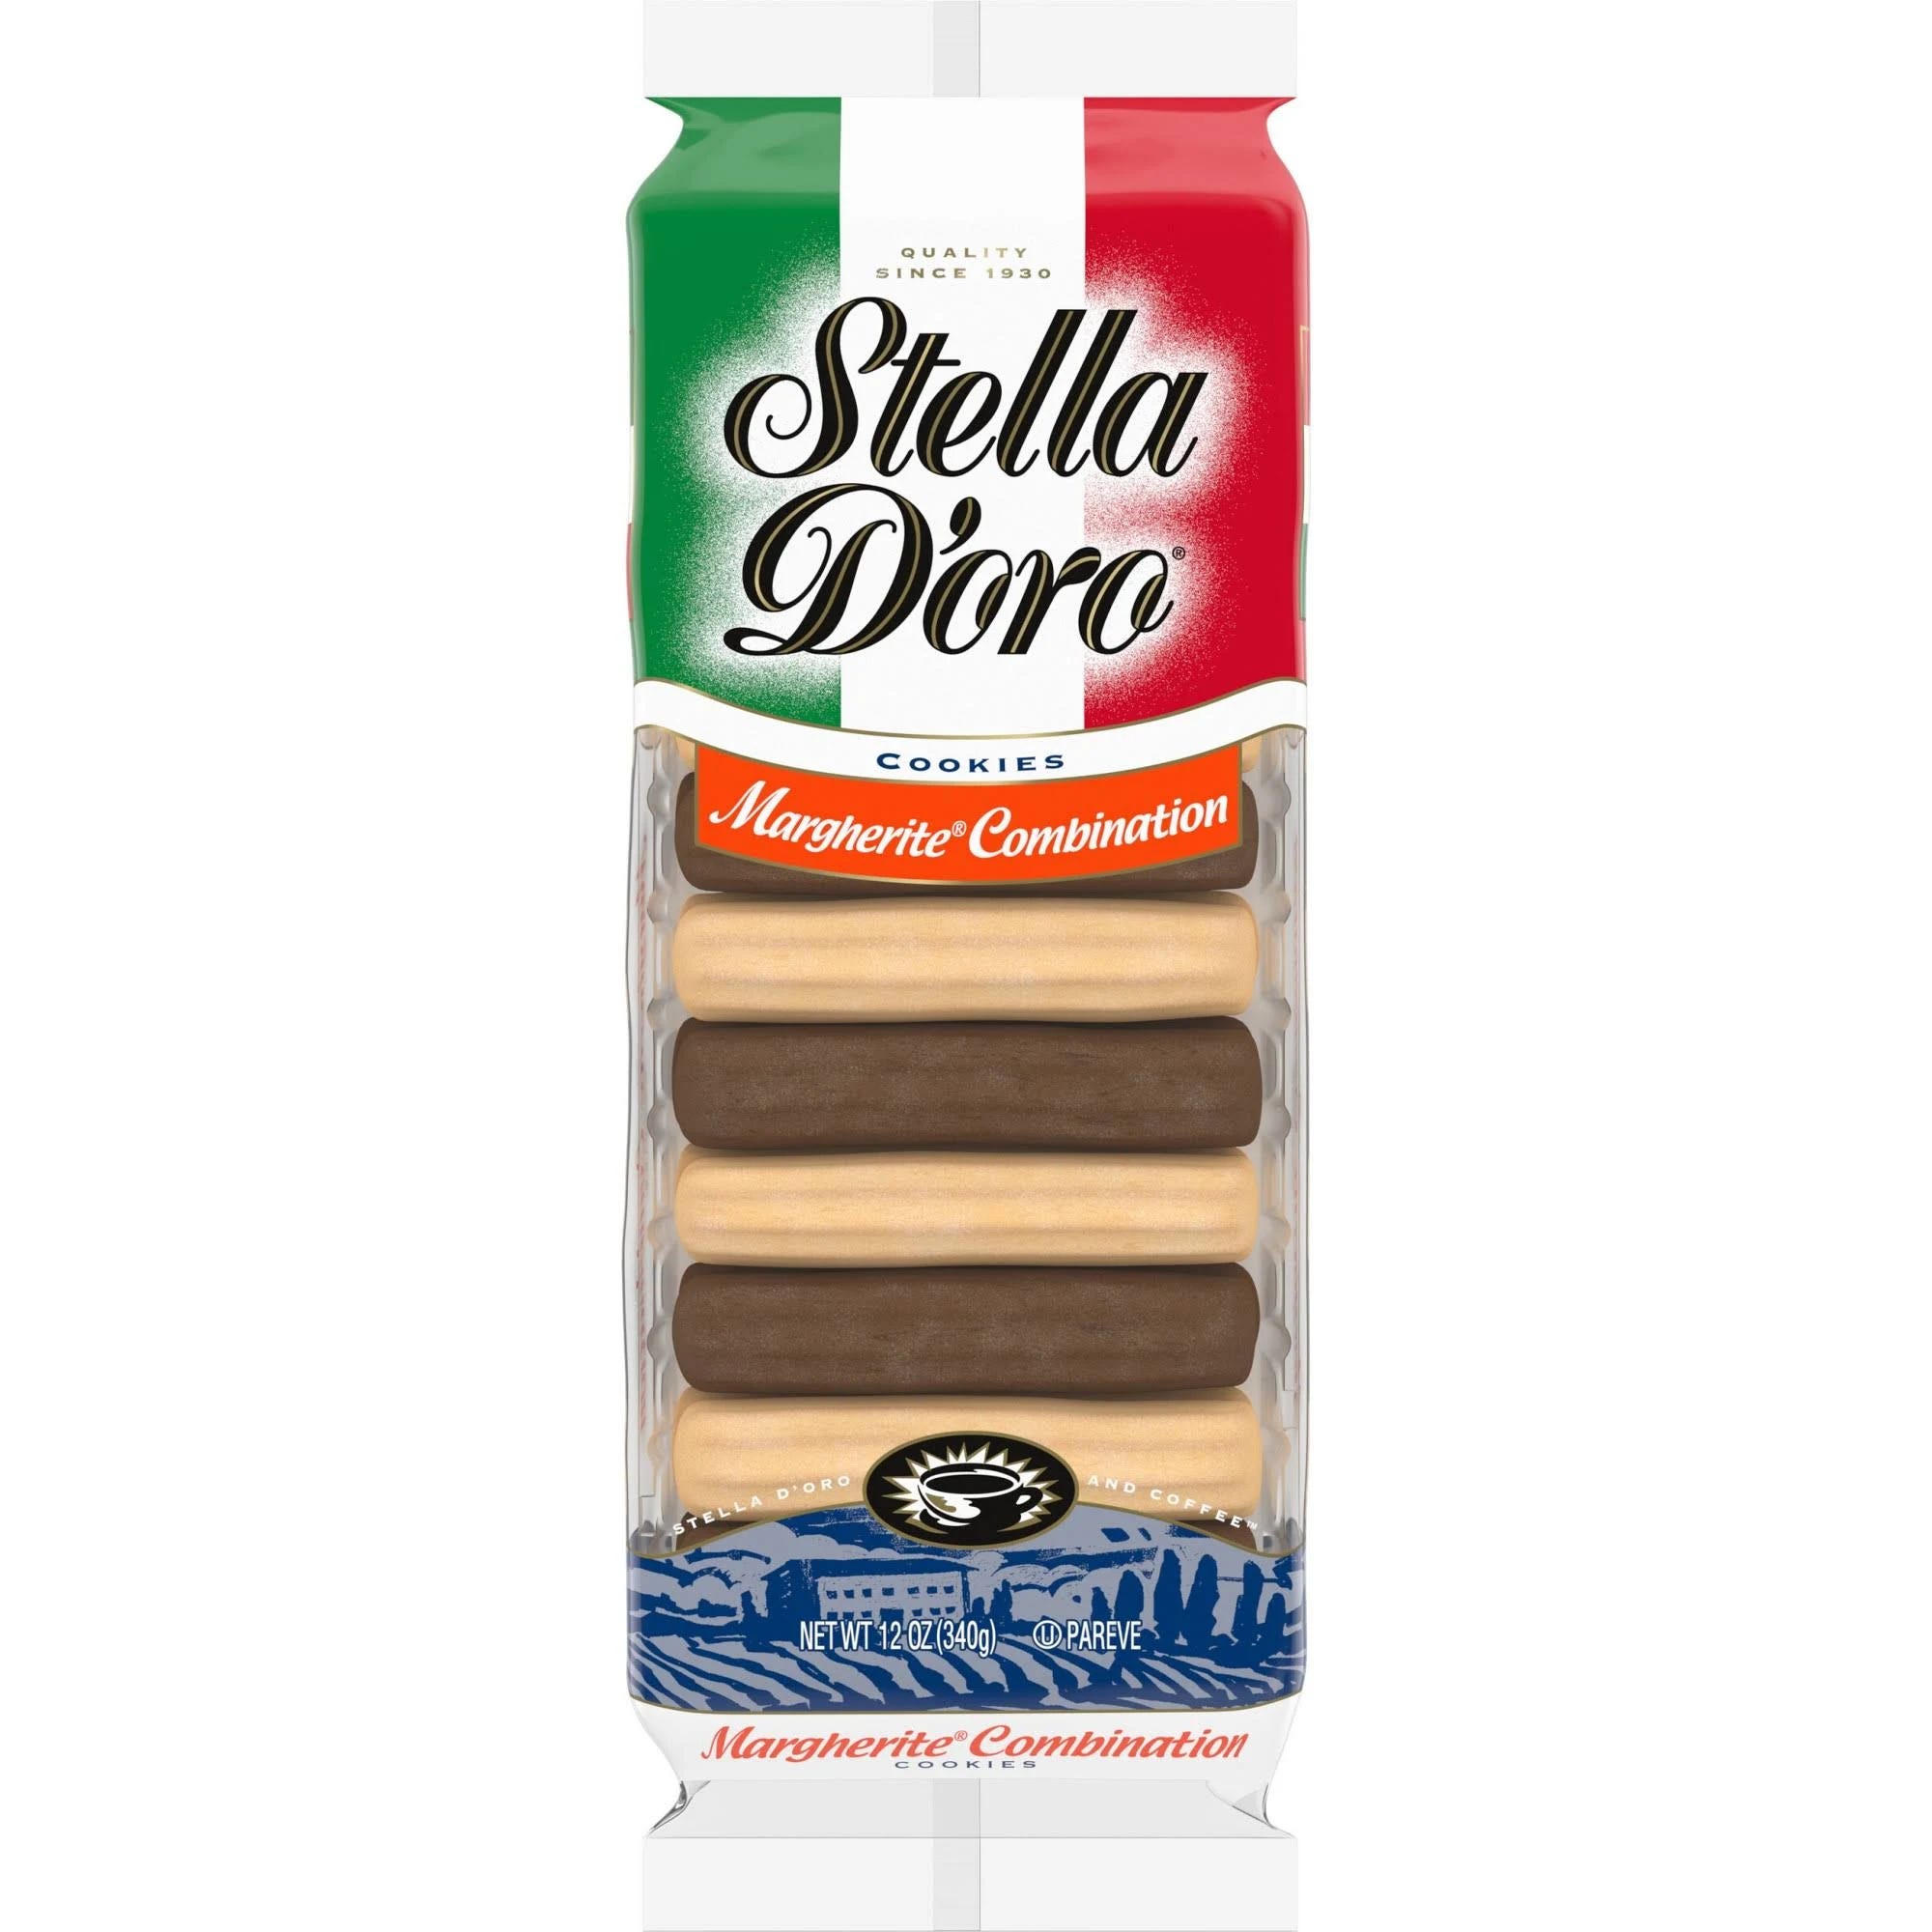 Stella D'oro Margherite Cookies - Chocolate and Vanilla Combo Pack | Image